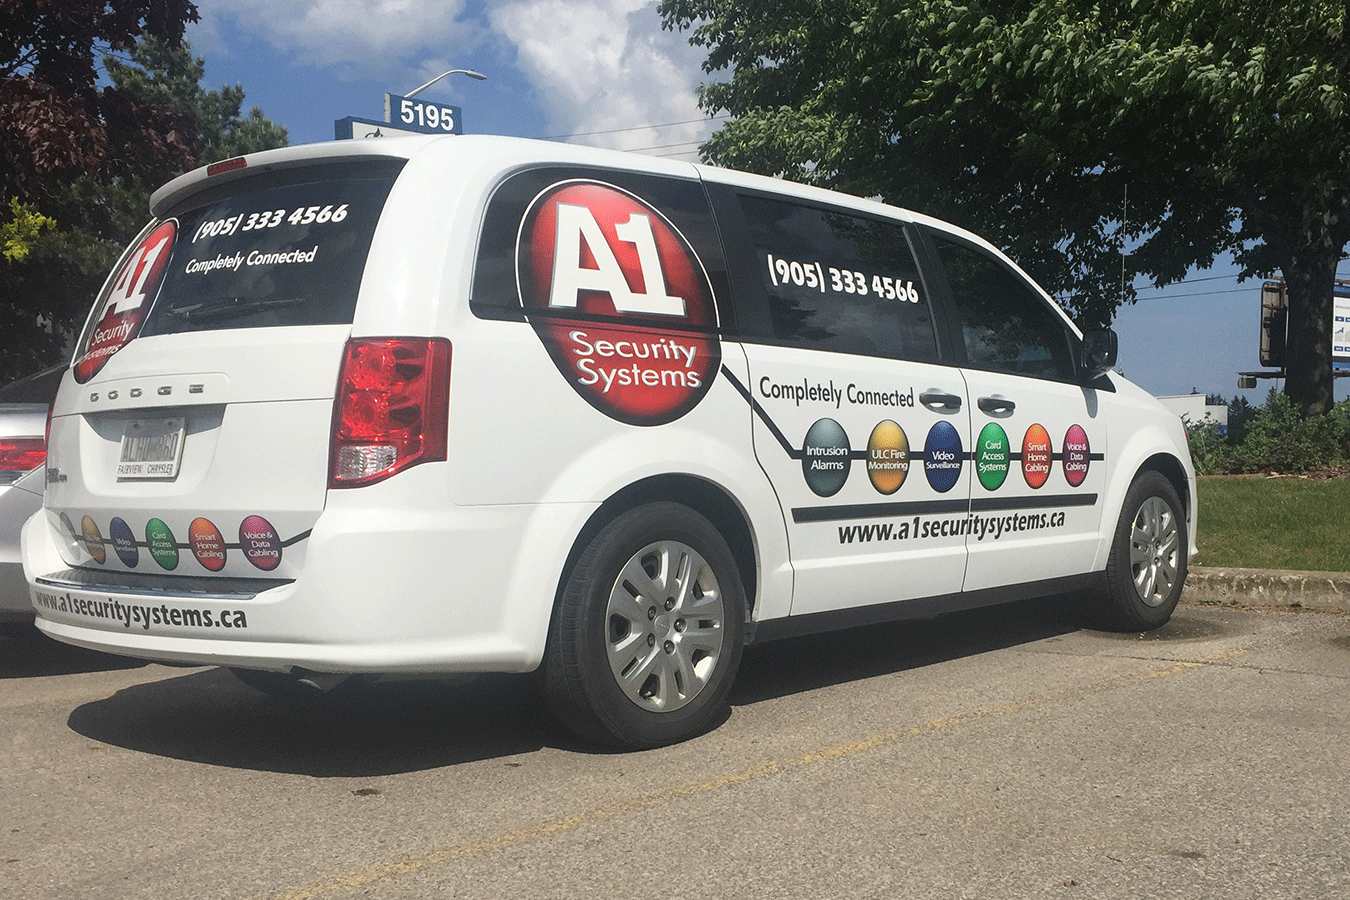 A1 service vehicle visiting customers for business security